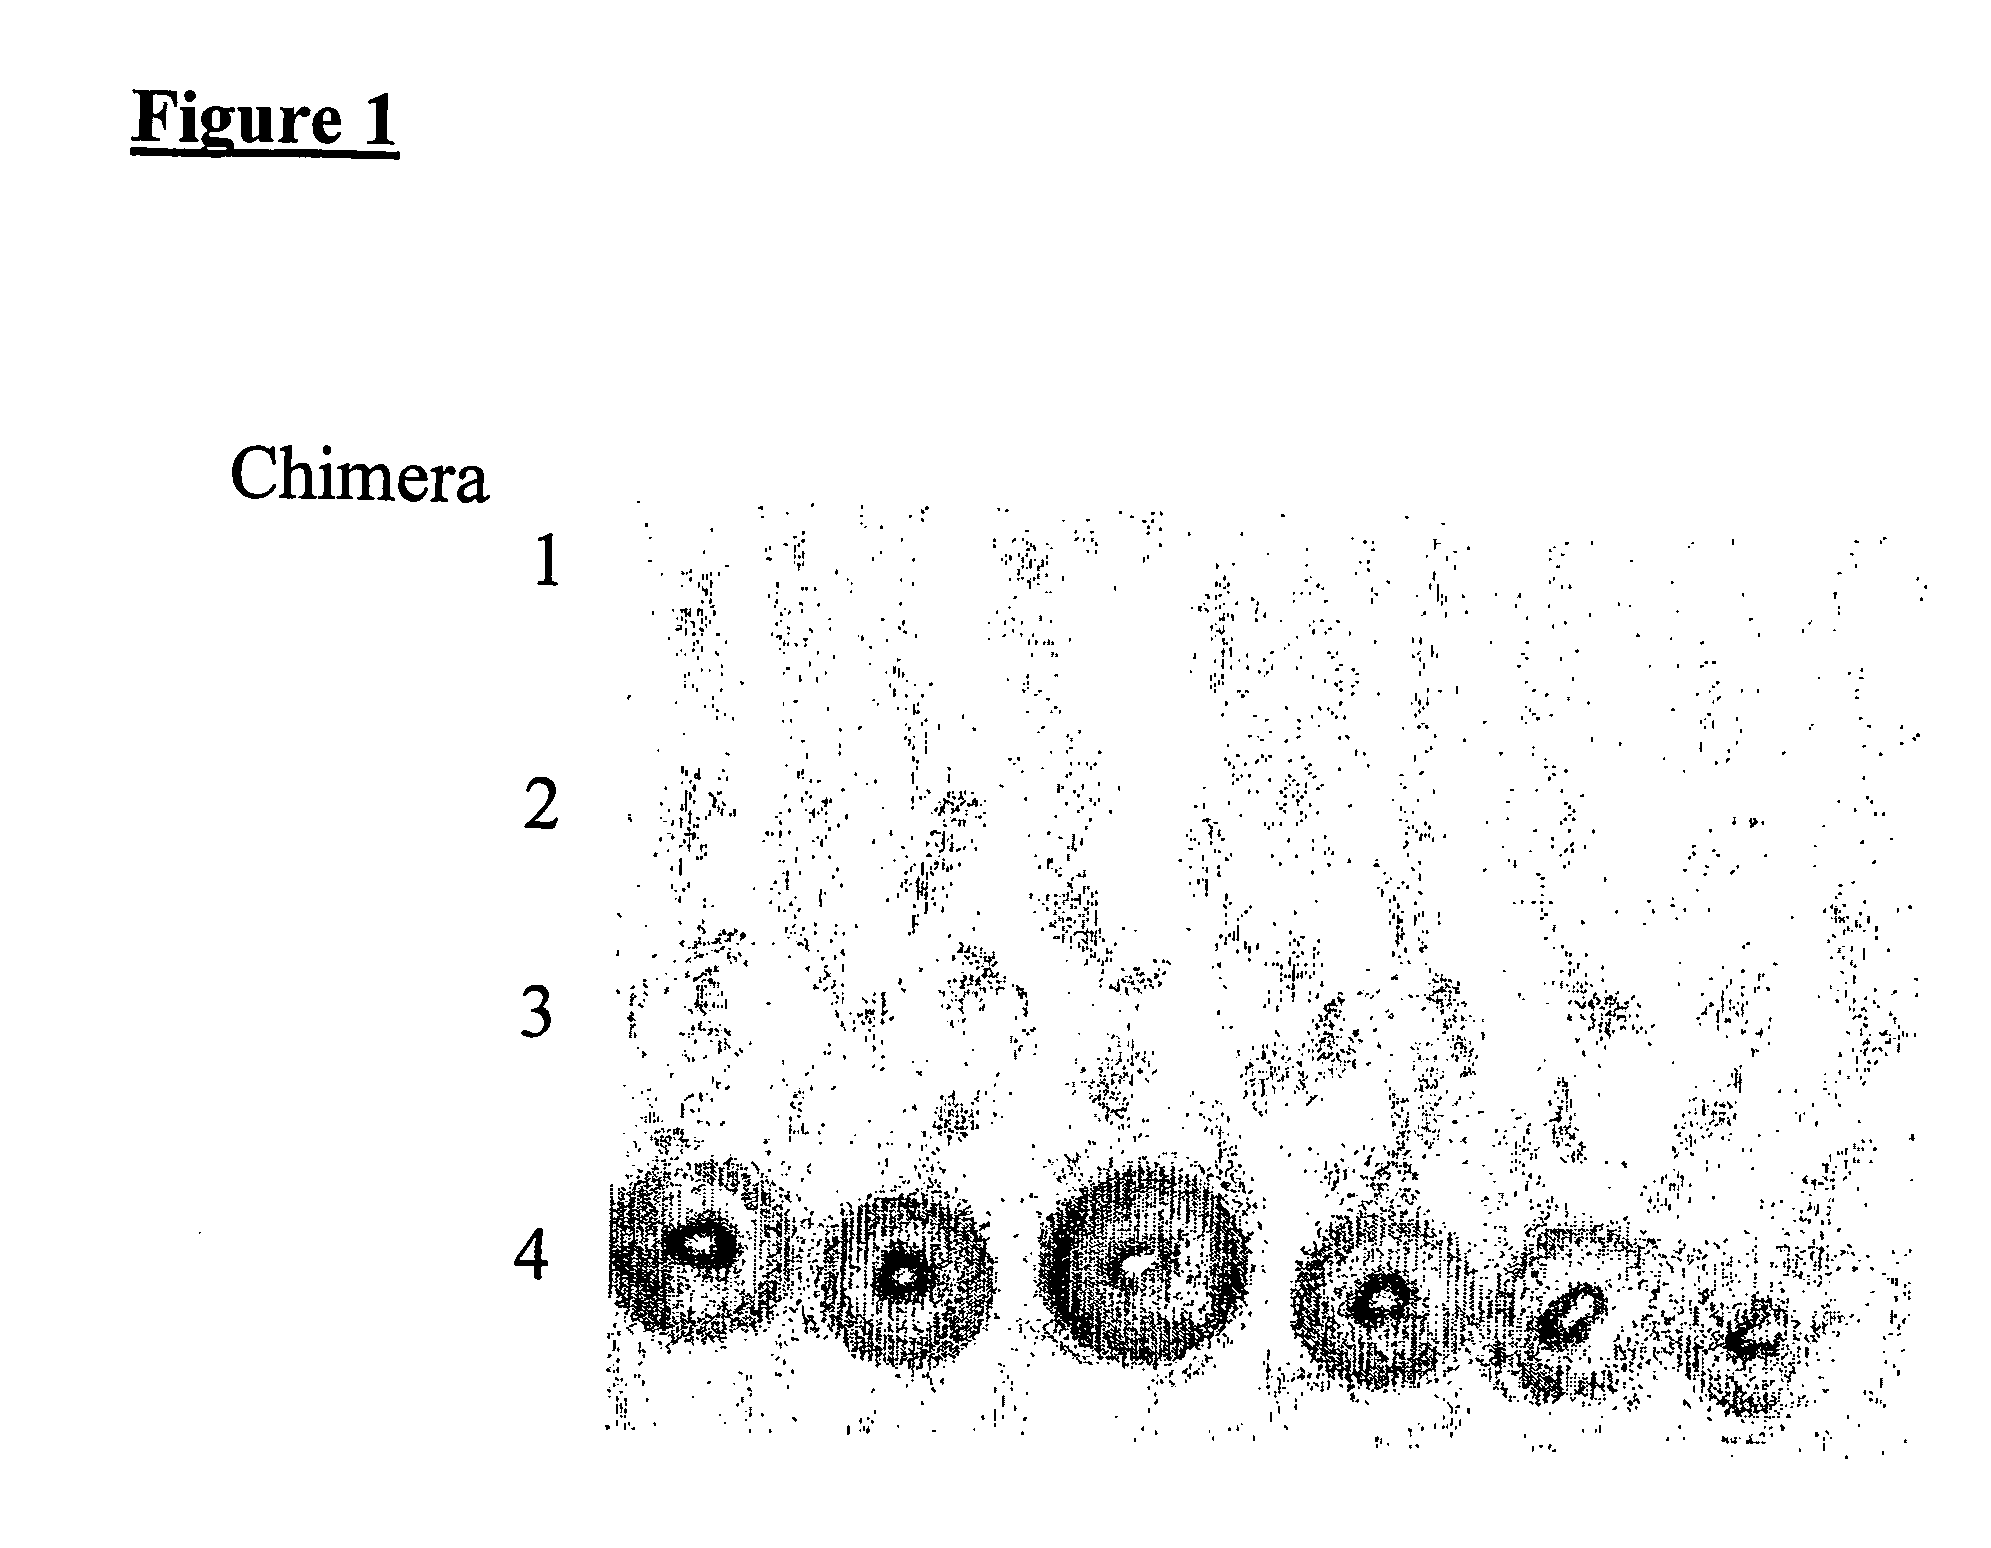 Secreted chlamydia polypeptides, polynucleotides coding therefor, therapeutic and diagnostic uses thereof